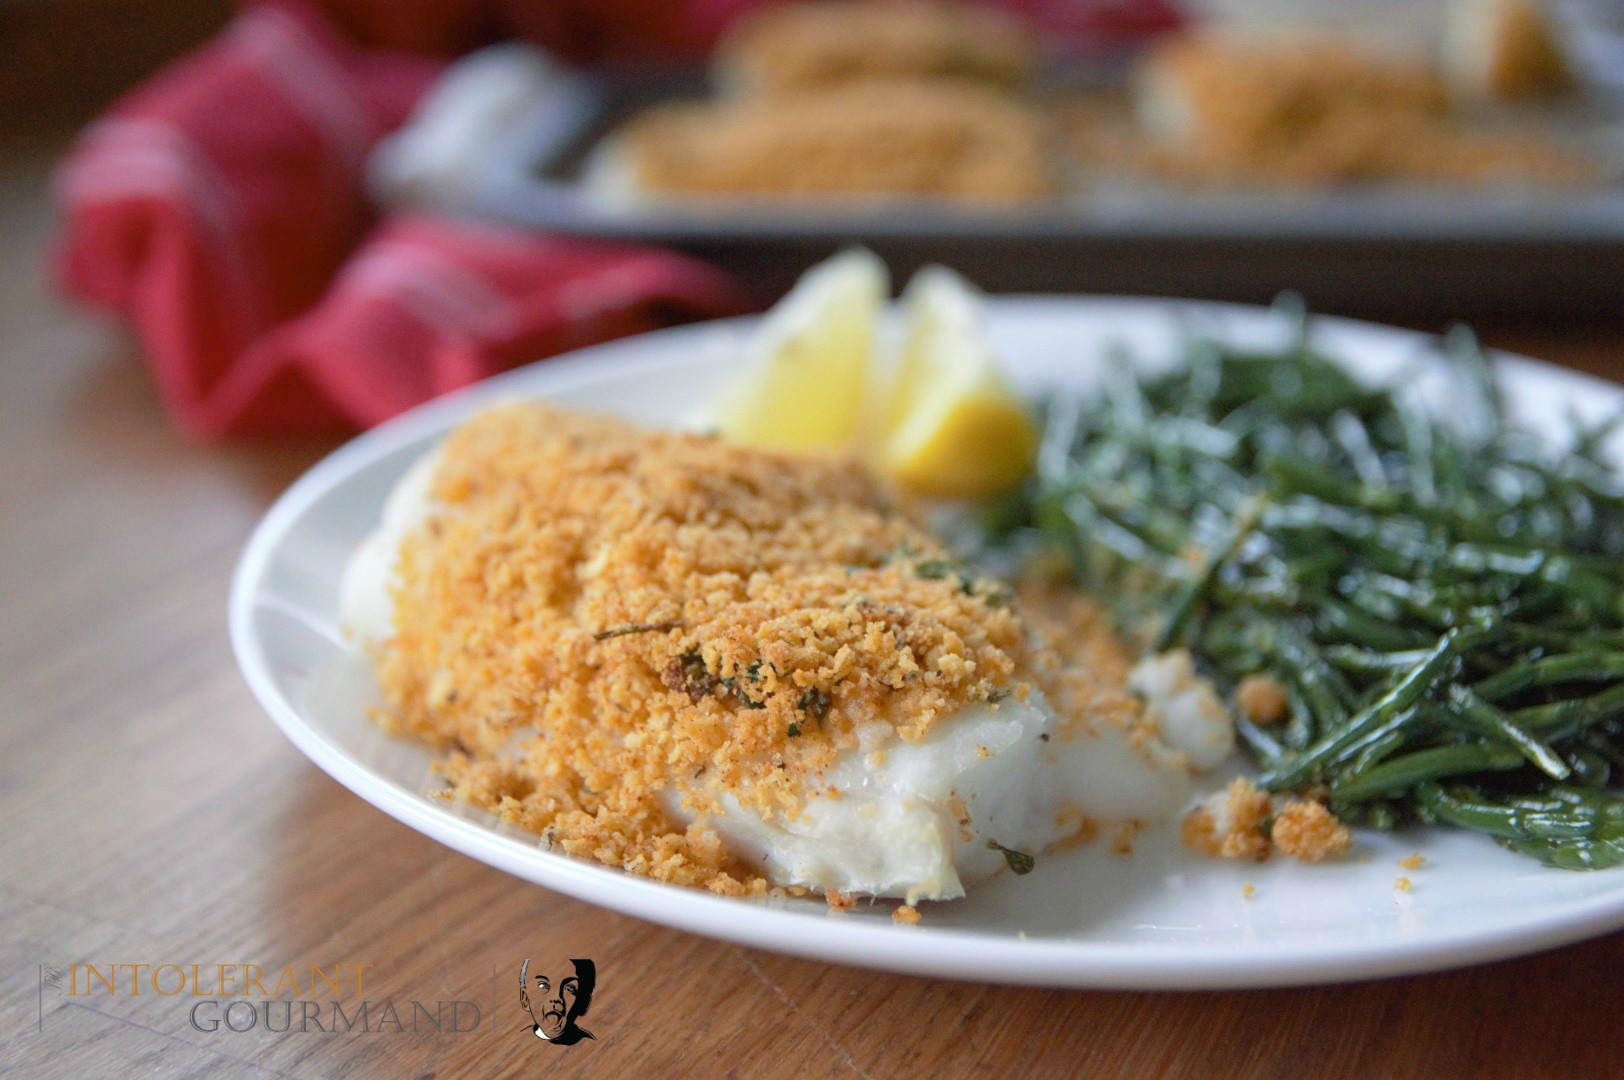 Crumb crusted cod - Stuck for recipe ideas? This deliciously simple meal takes just 30 minutes to make, and is packed full of flavour! It's also gluten-free and perfect for those of you being mindful of IBS symptoms! www.intolerantgourmand.com